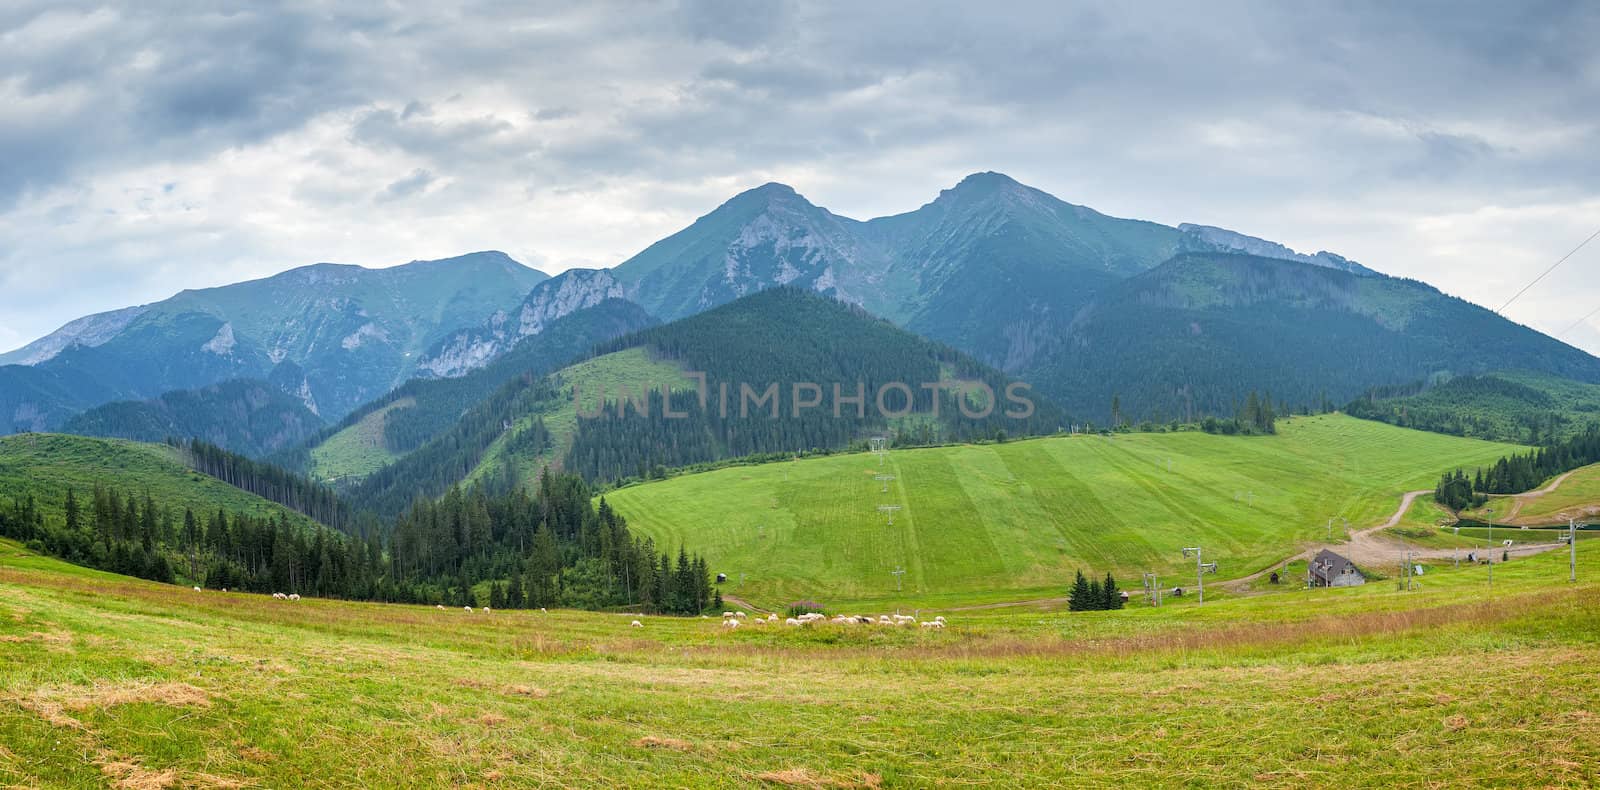 High resolution panorama of mountains  in National Park High Tat by palinchak